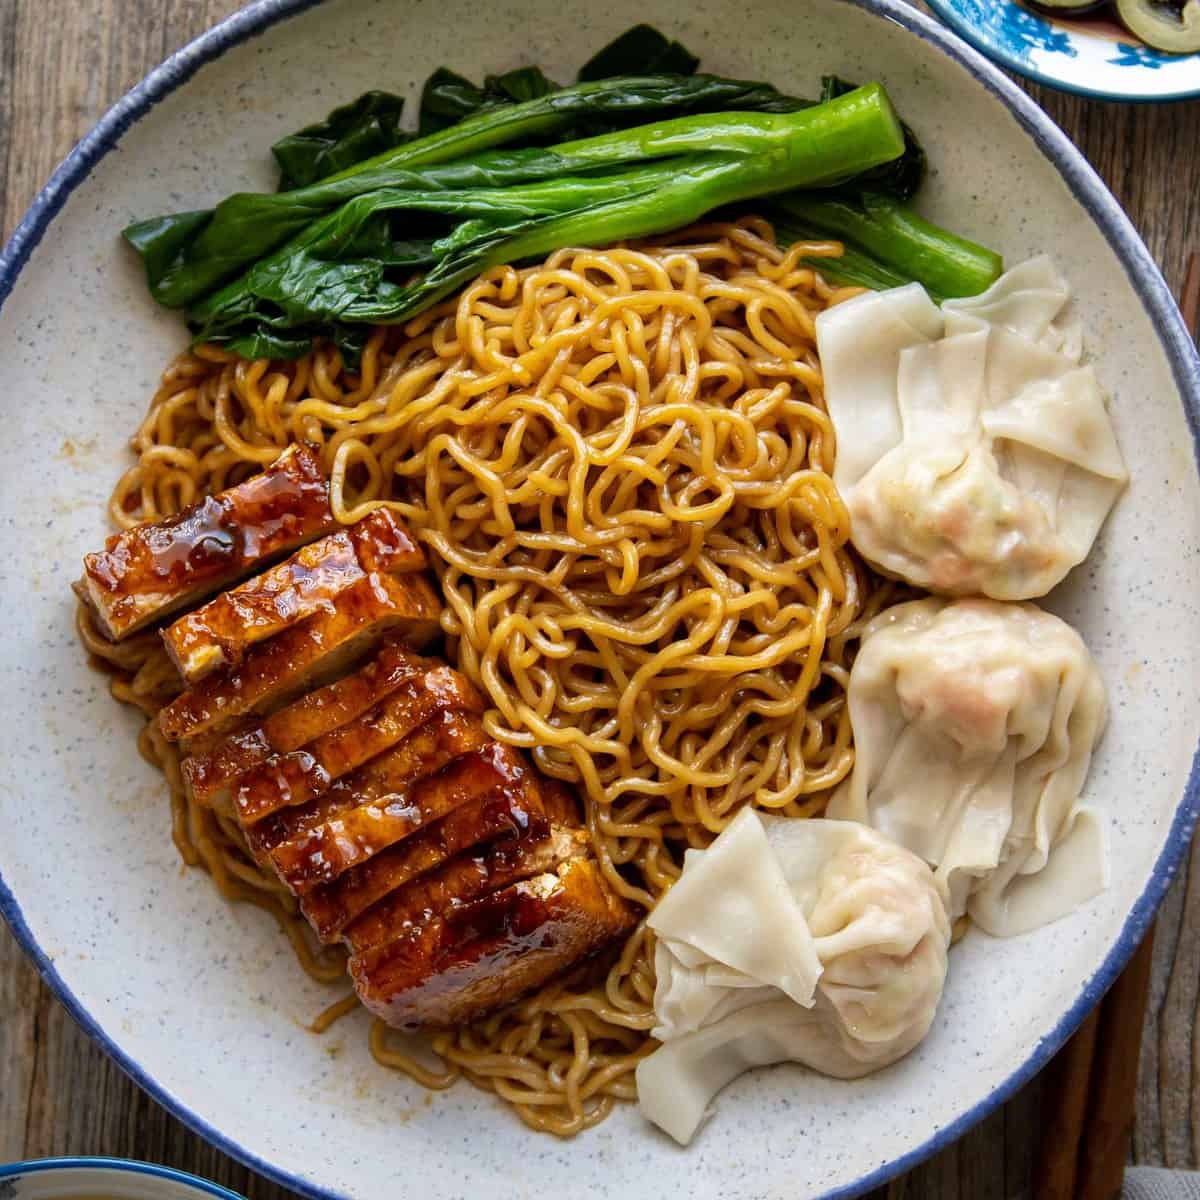  A scrumptious swirl of noodle and veggies in every bite.